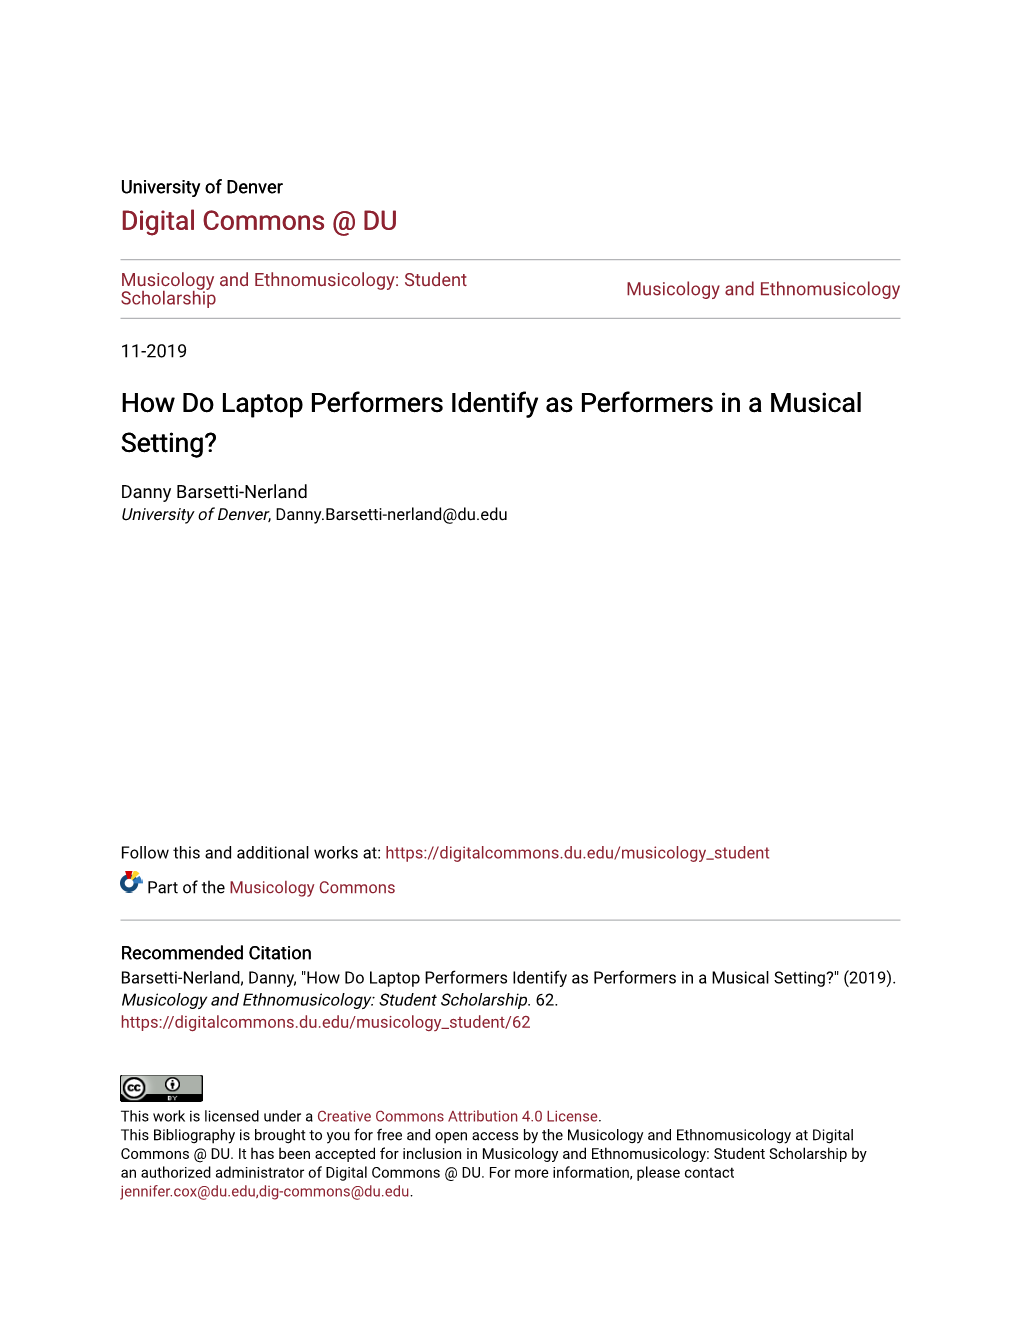 How Do Laptop Performers Identify As Performers in a Musical Setting?